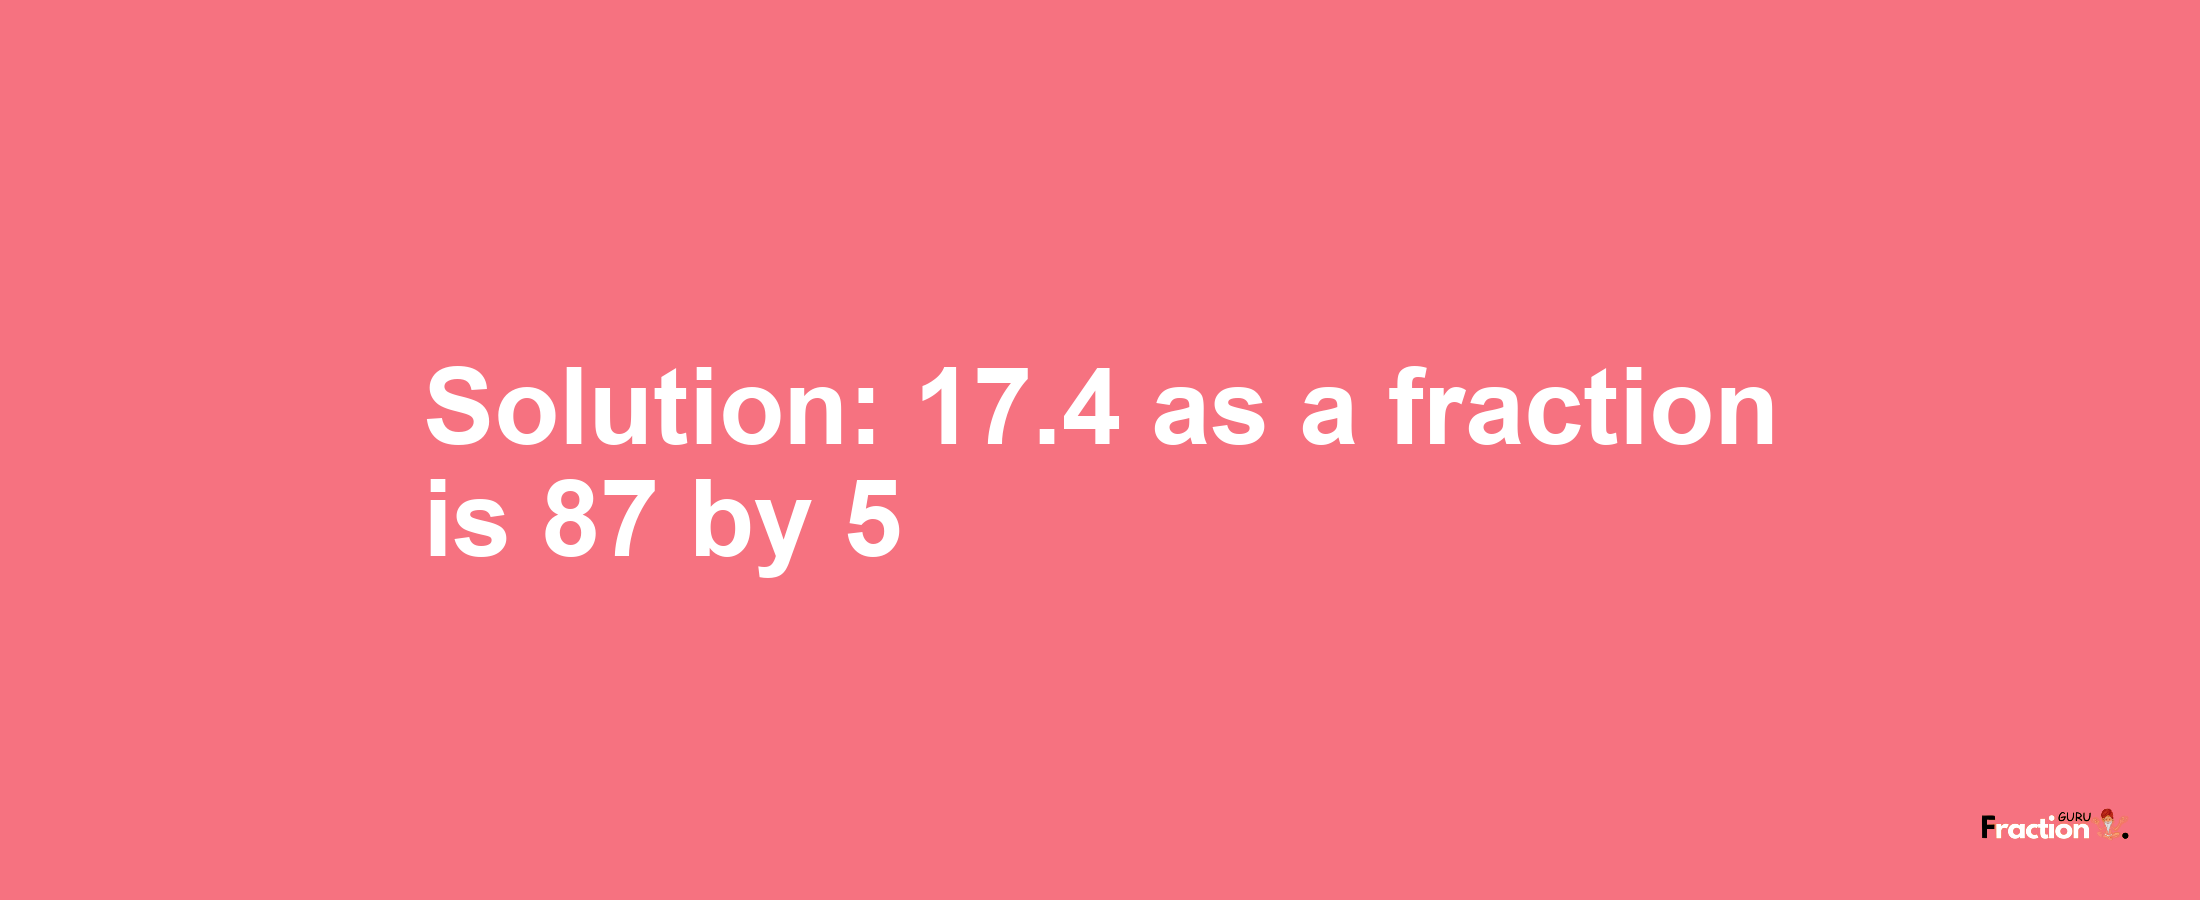 Solution:17.4 as a fraction is 87/5